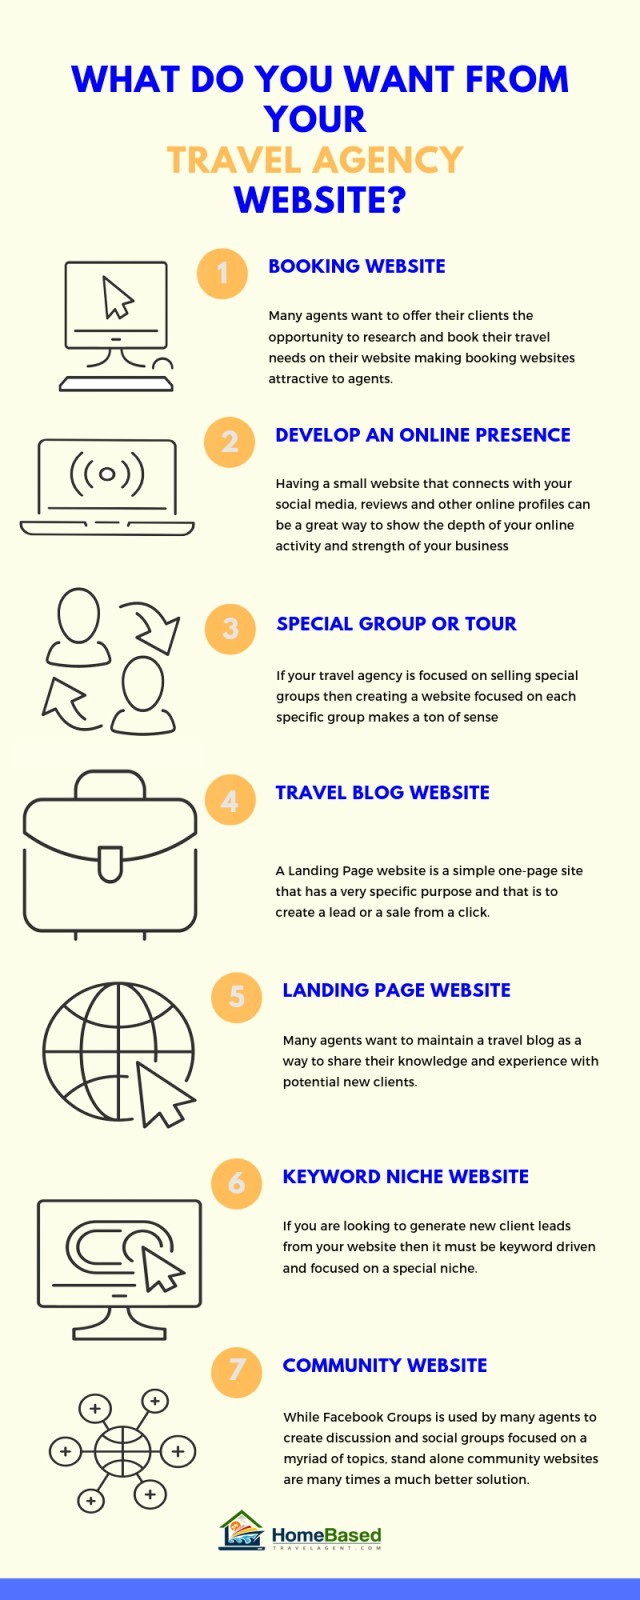 Requirements from Travel Agency